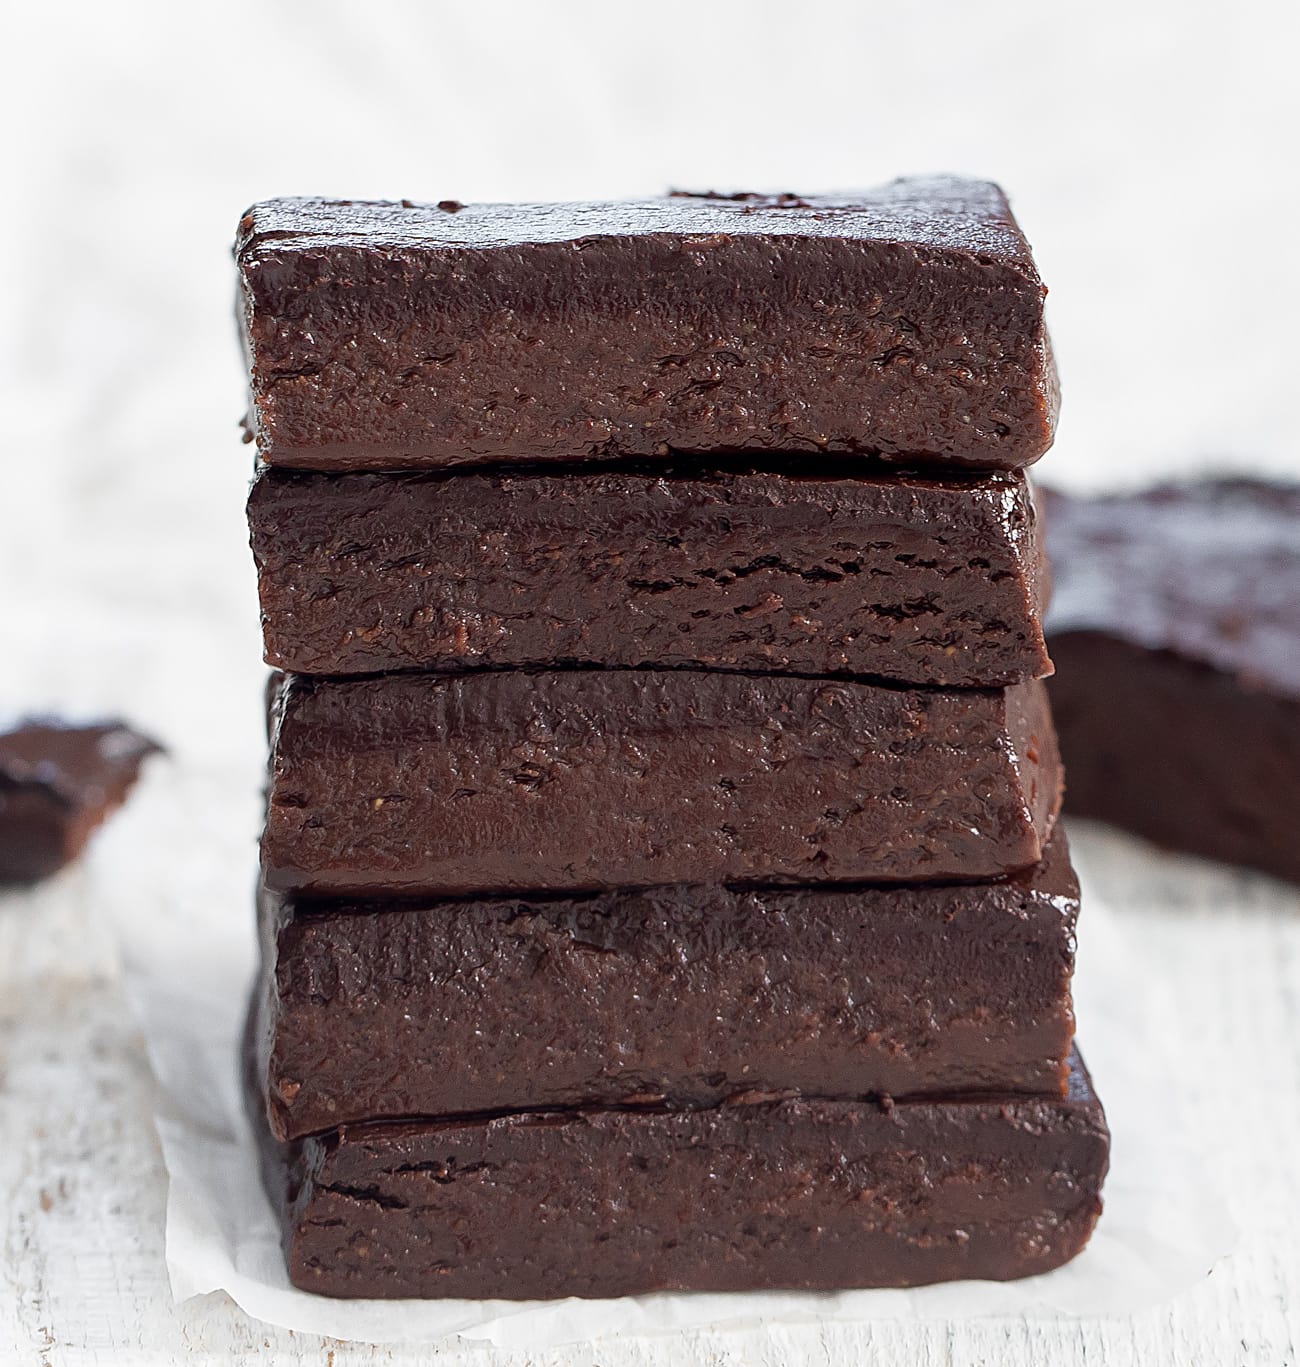 Satisfy Your Chocolate Cravings With This 3-Ingredient No-Baked Chocolate Brownies